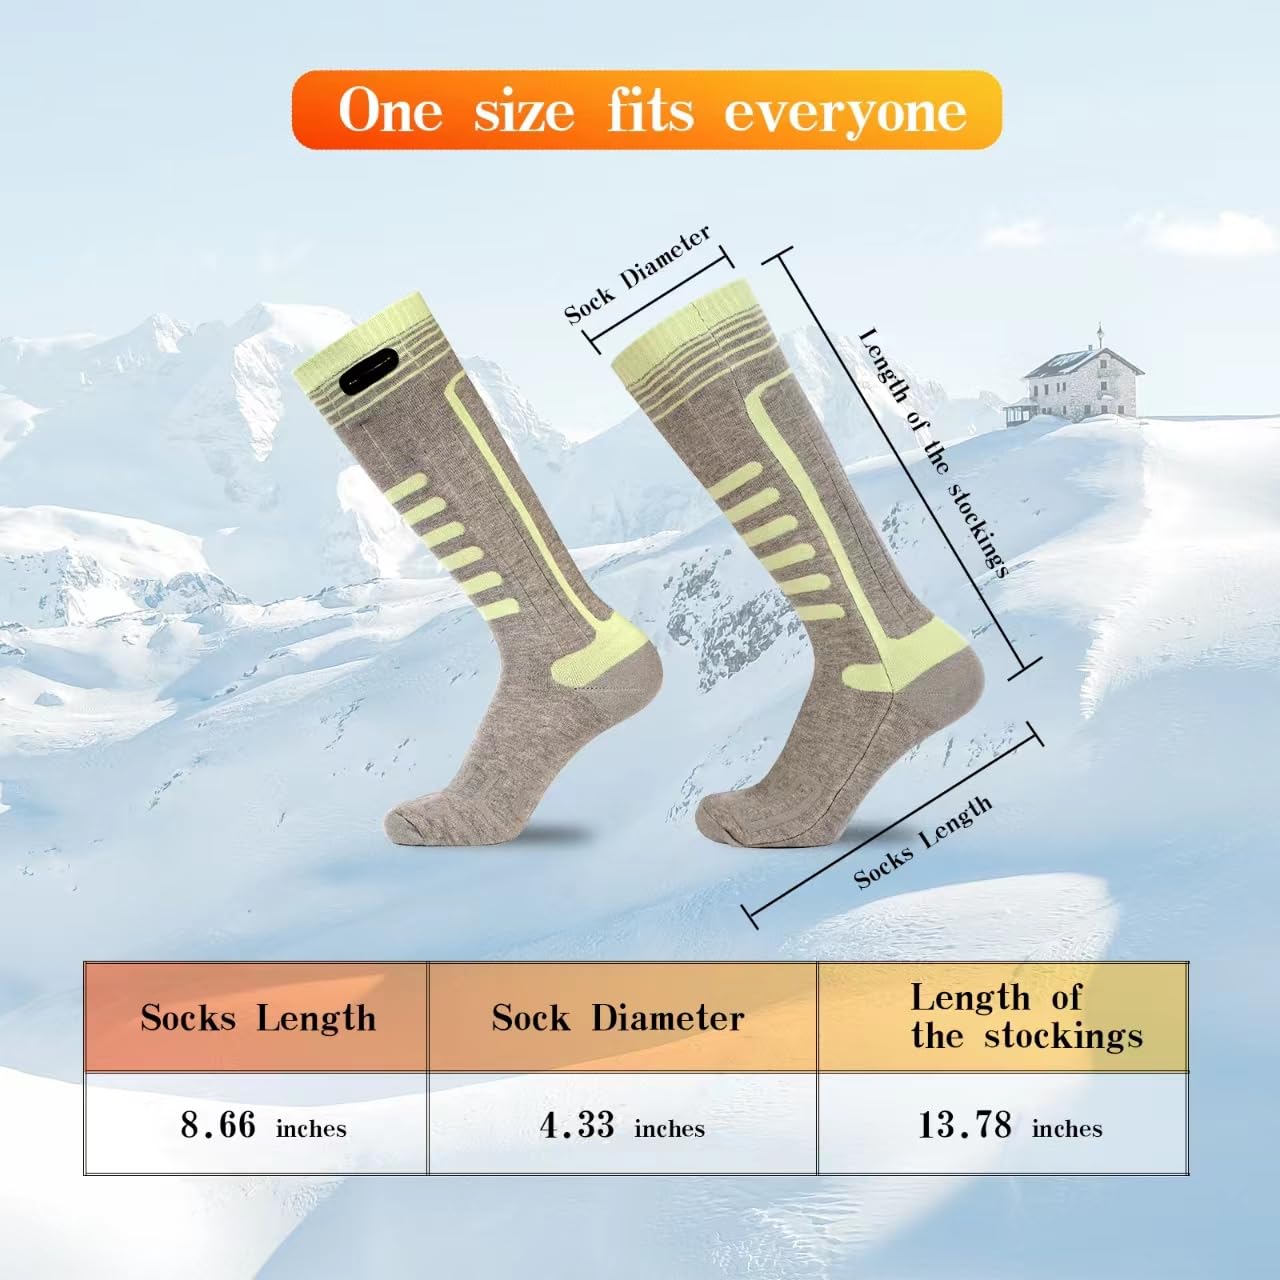 WEIVIOQ Rechargeable Heated Socks for Men Women,Upgraded 5000mAh Battery Electric Socks Foot Warmer with APP Control and 4 Heat Settings for Winter Outdoor Skiing Hiking Motorcycle Camping